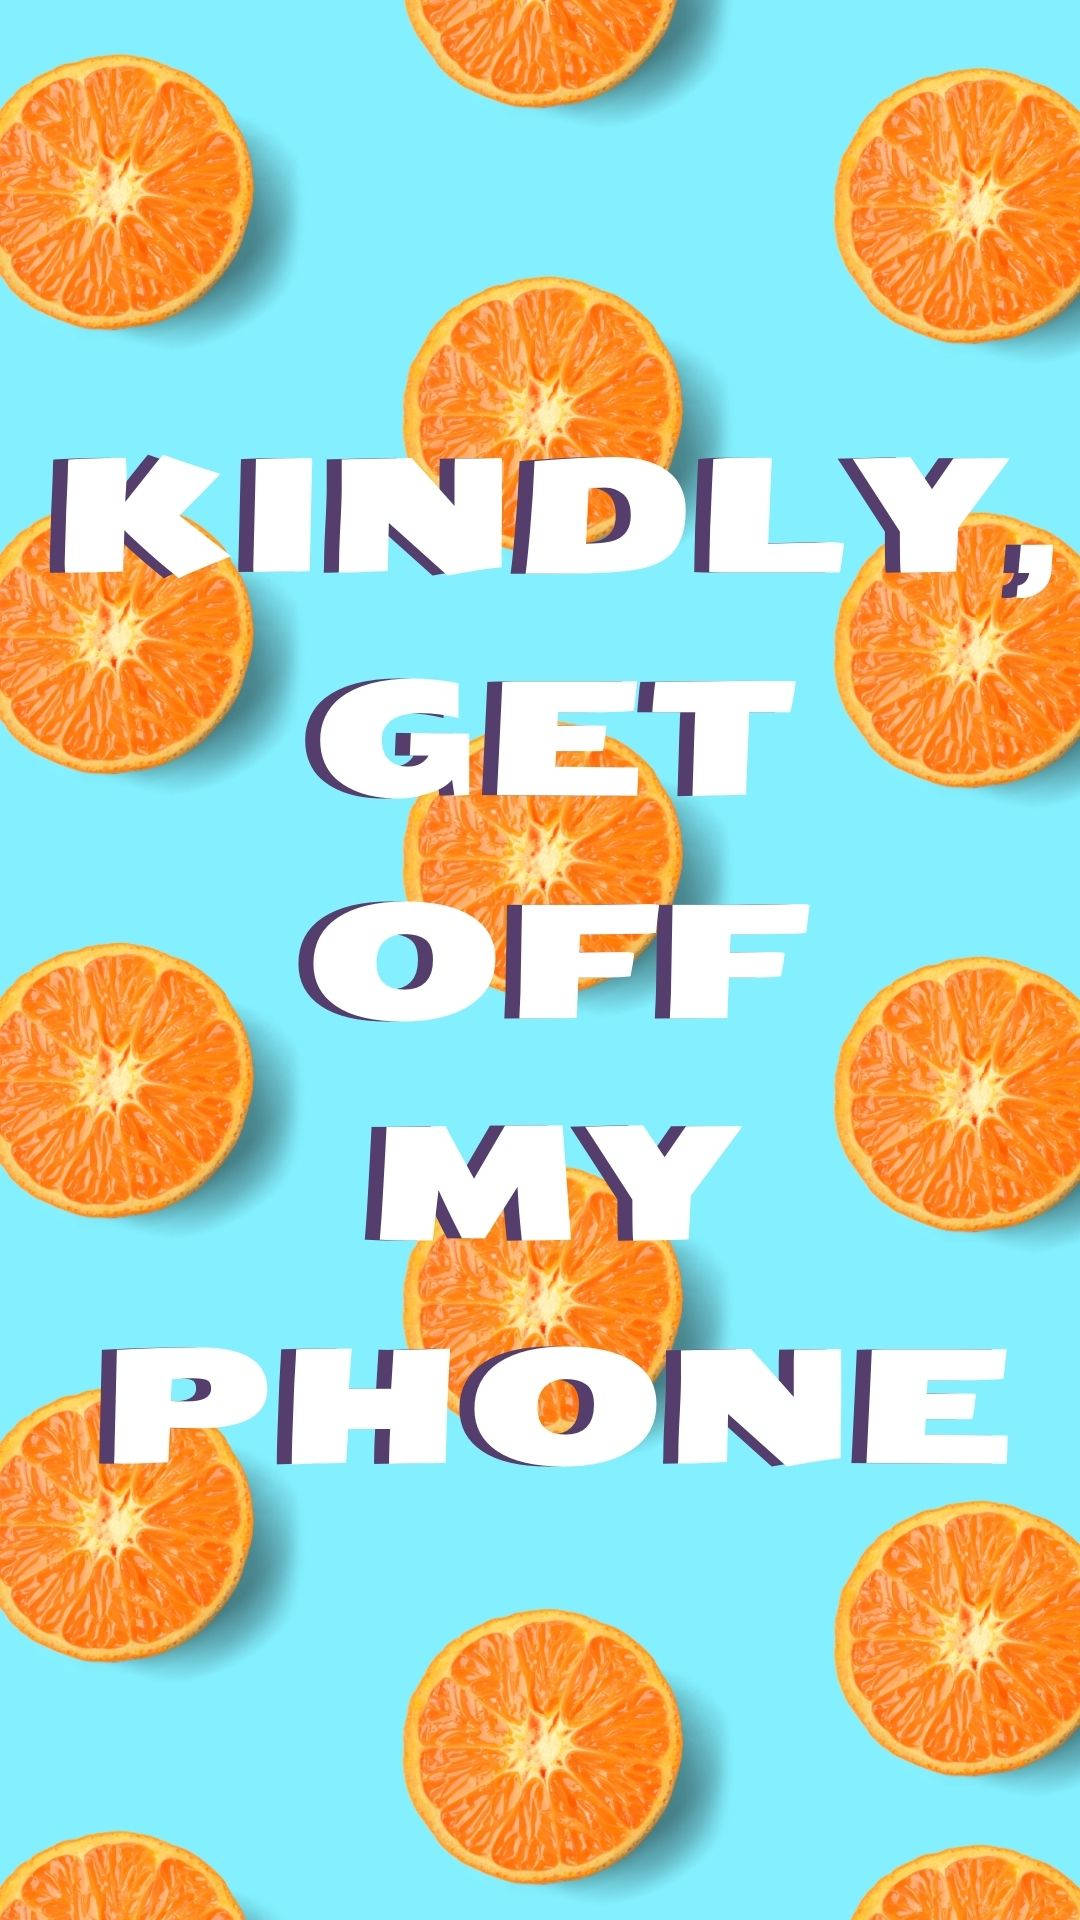 An Abstract Depiction of Intrusion: Oranges Invading a Phone Wallpaper